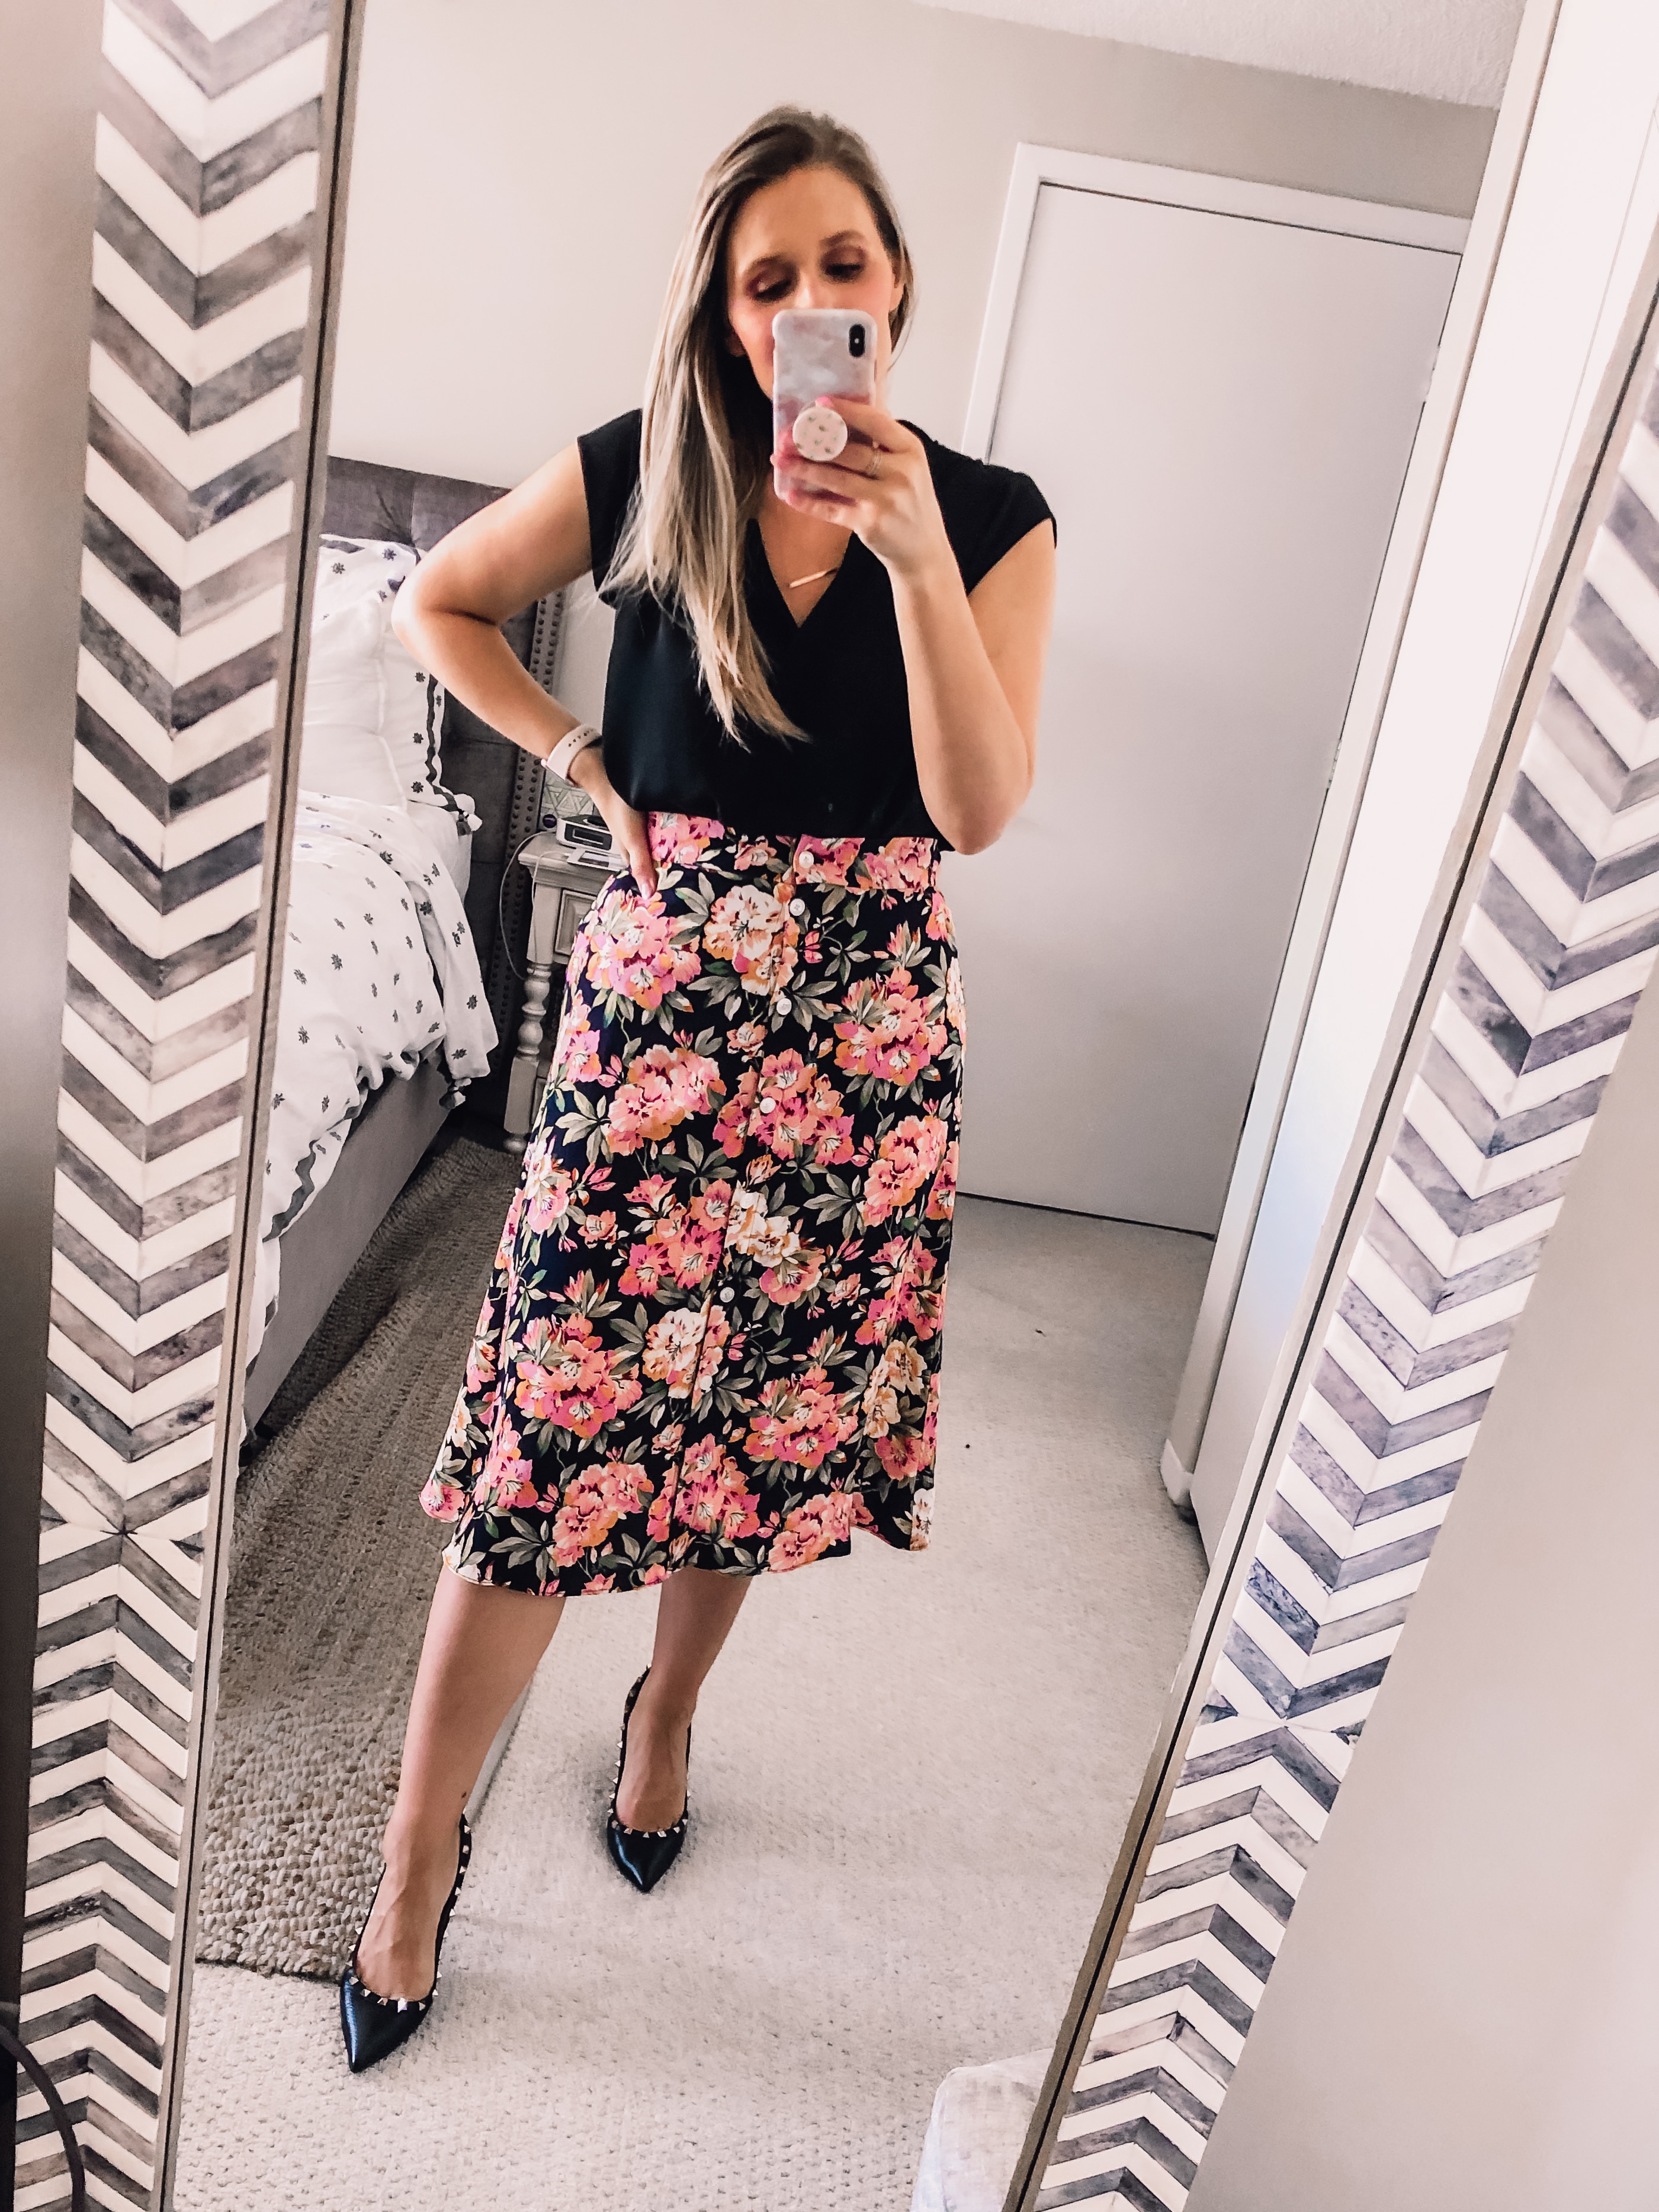 OOTD 7.16.19: Floral Skirt and Best ...